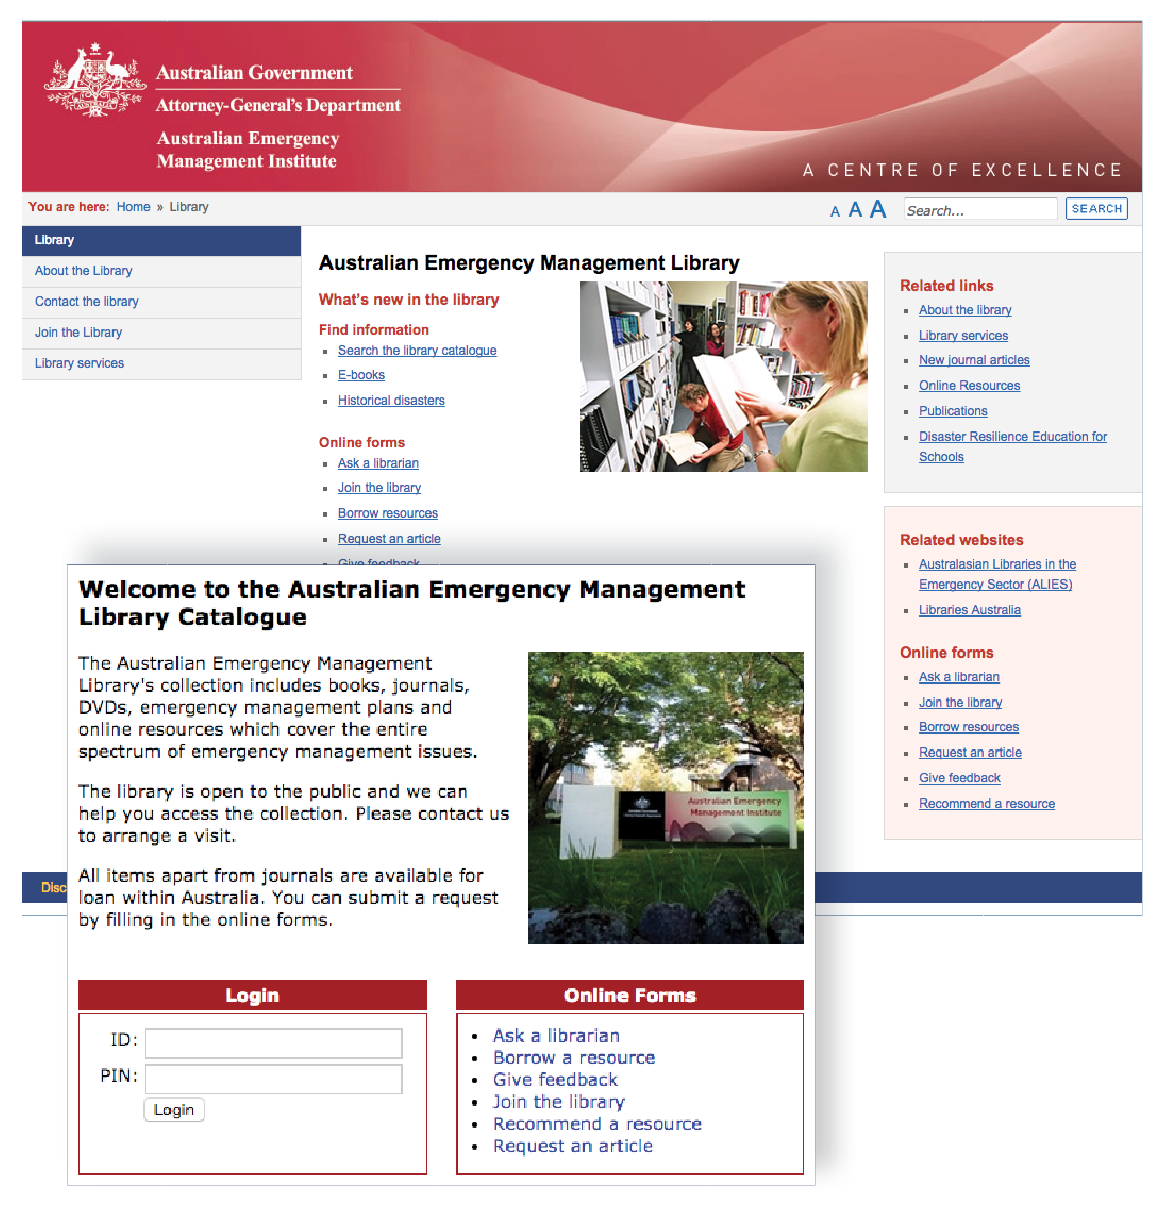 A screenshot of the Australian Emergency Management Library homepage and catalogue website